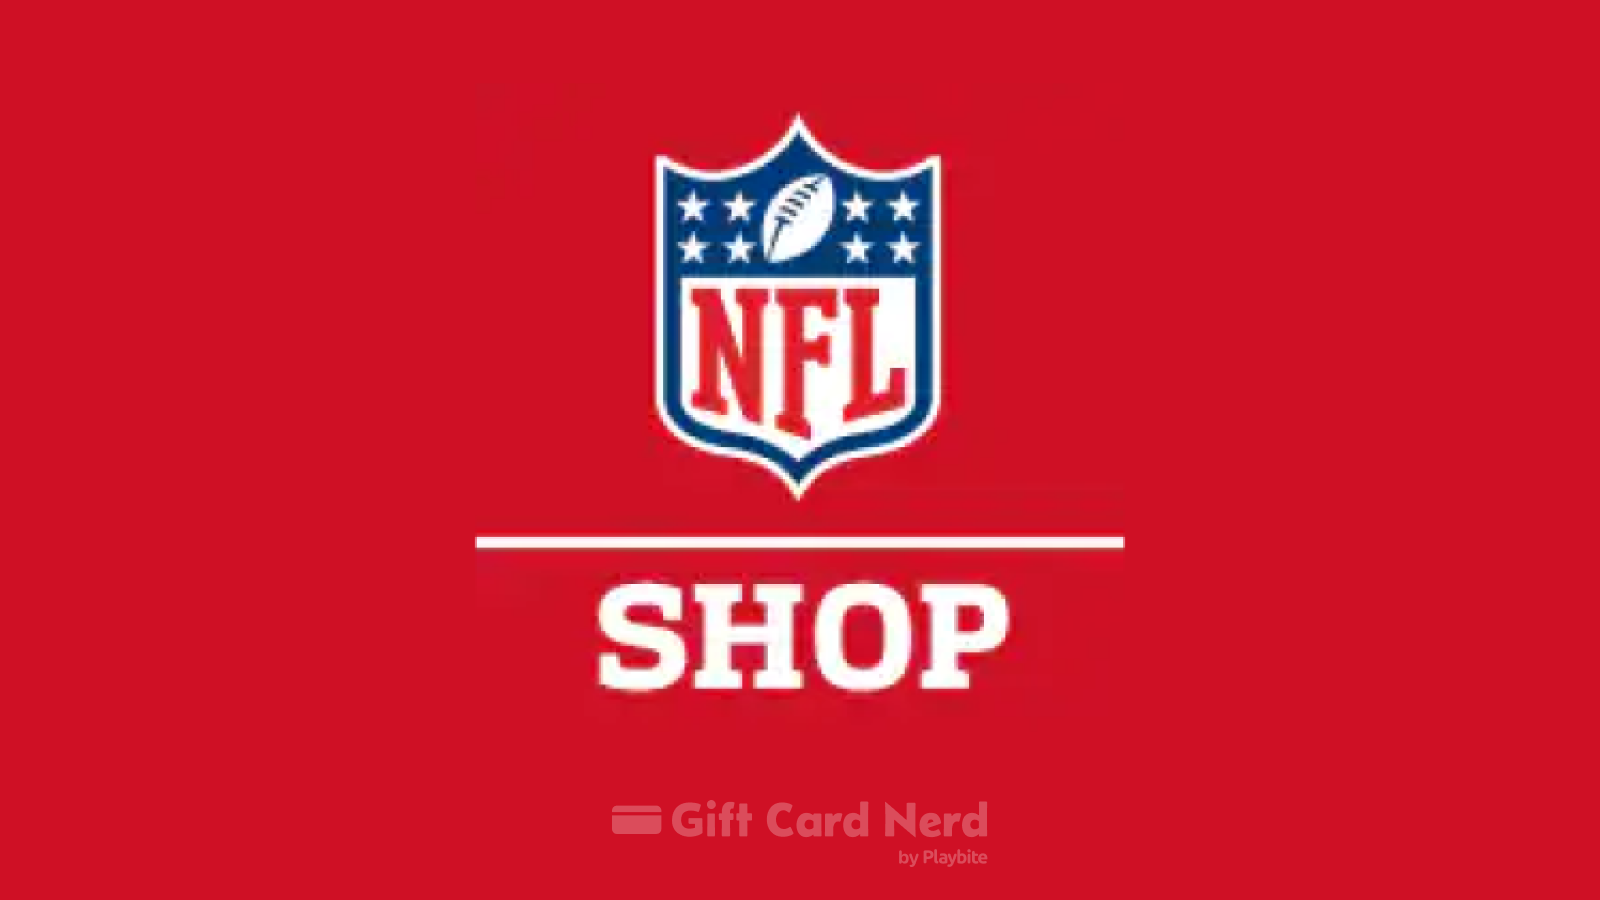 Can I Use an NFL Shop Gift Card on Venmo?